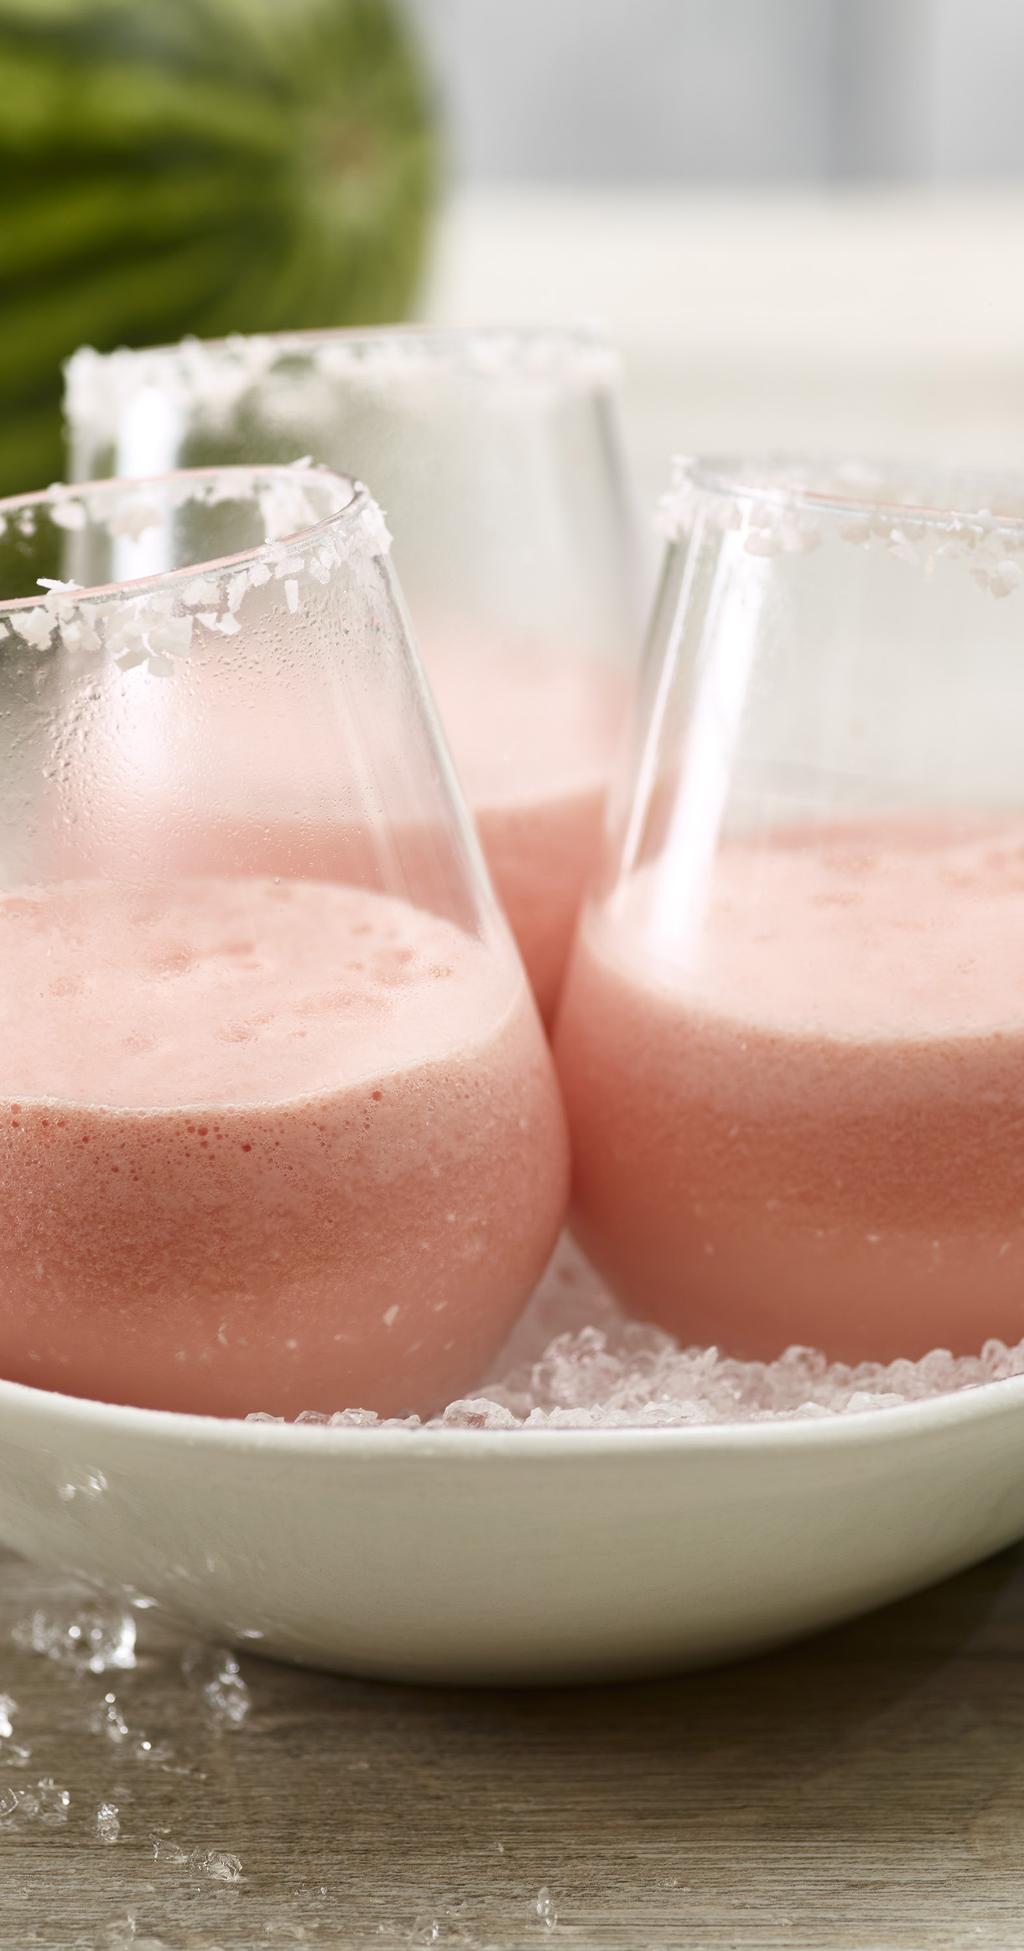 This drink is creamy, refreshing, and sweet, without being too sweet. Watermelon is the richest source of lycopene, a phytonutrient that might help lower cancer risk.